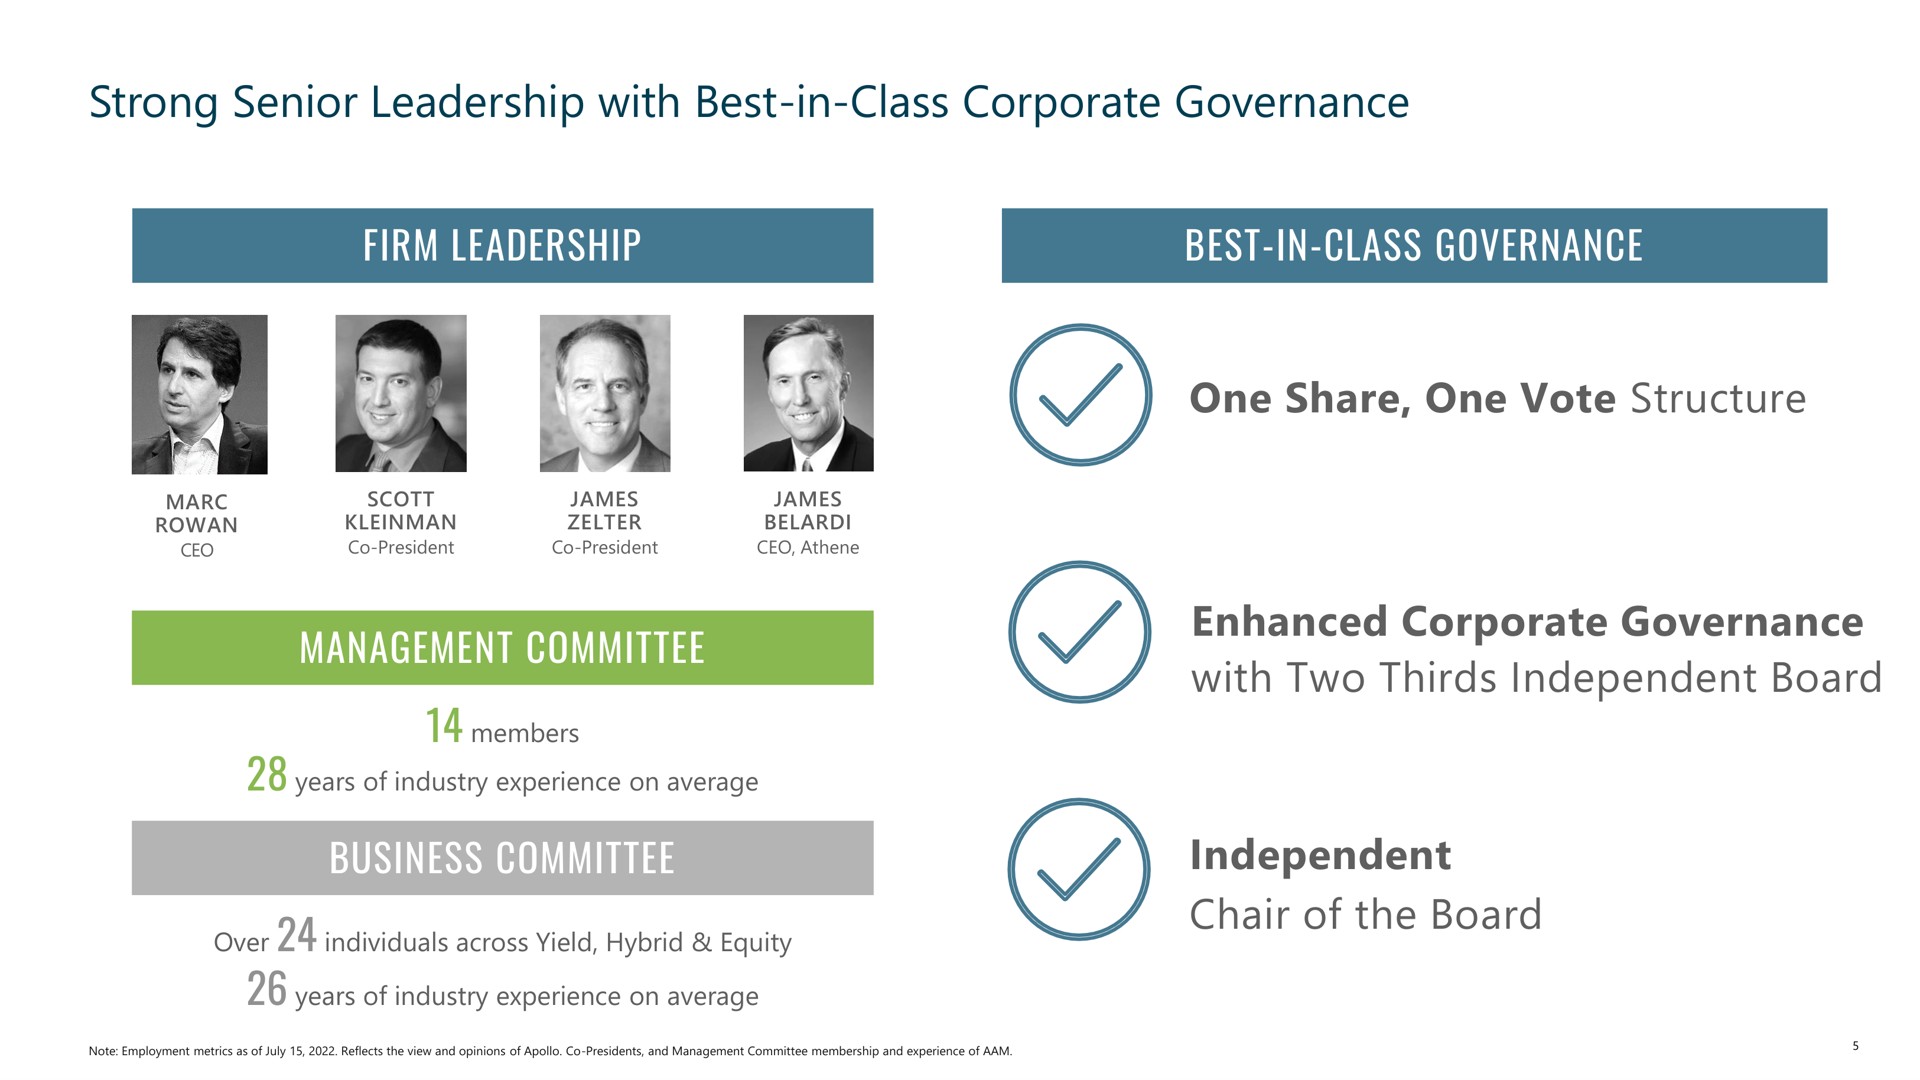 strong senior leadership with best in class corporate governance firm leadership best in class governance management committee business committee one share one vote structure enhanced corporate governance with two thirds independent board independent chair of the board he a a as day | Apollo Global Management